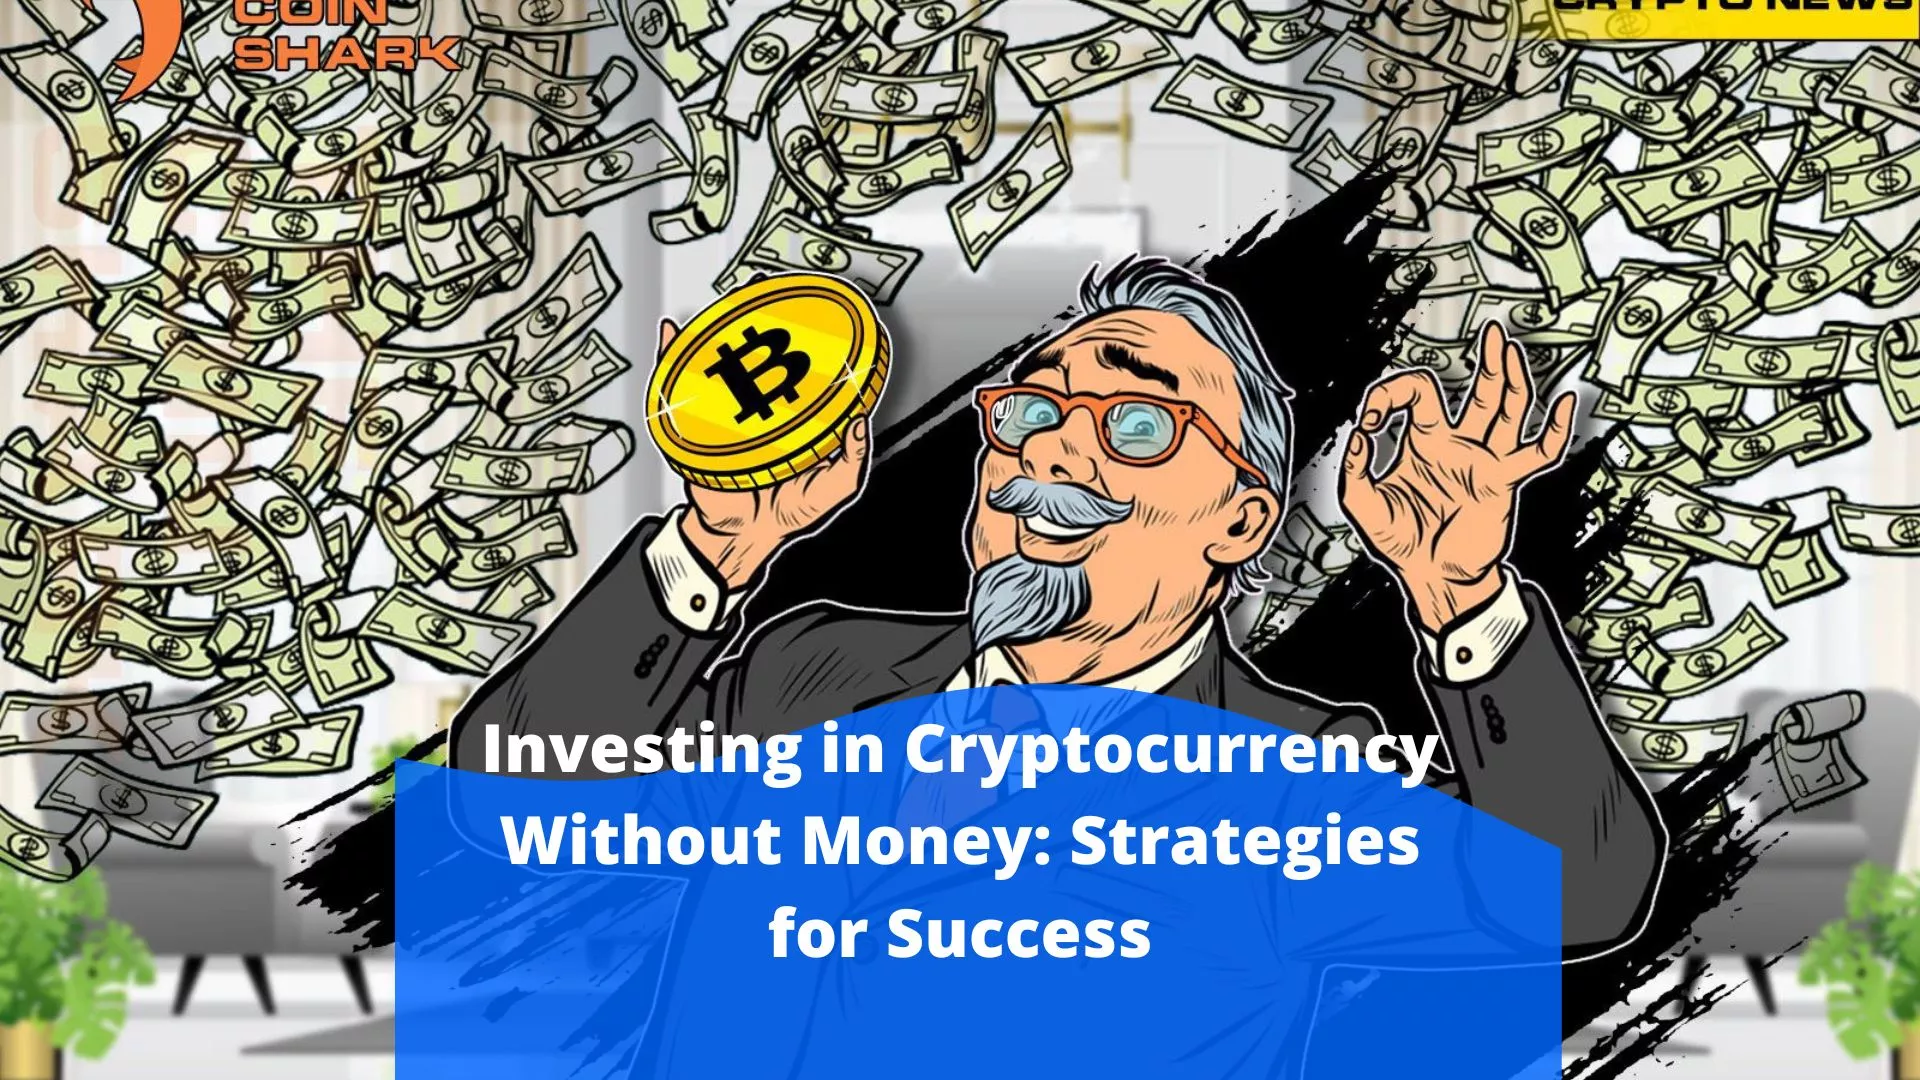 Investing in Cryptocurrency Without Money: Strategies for Success